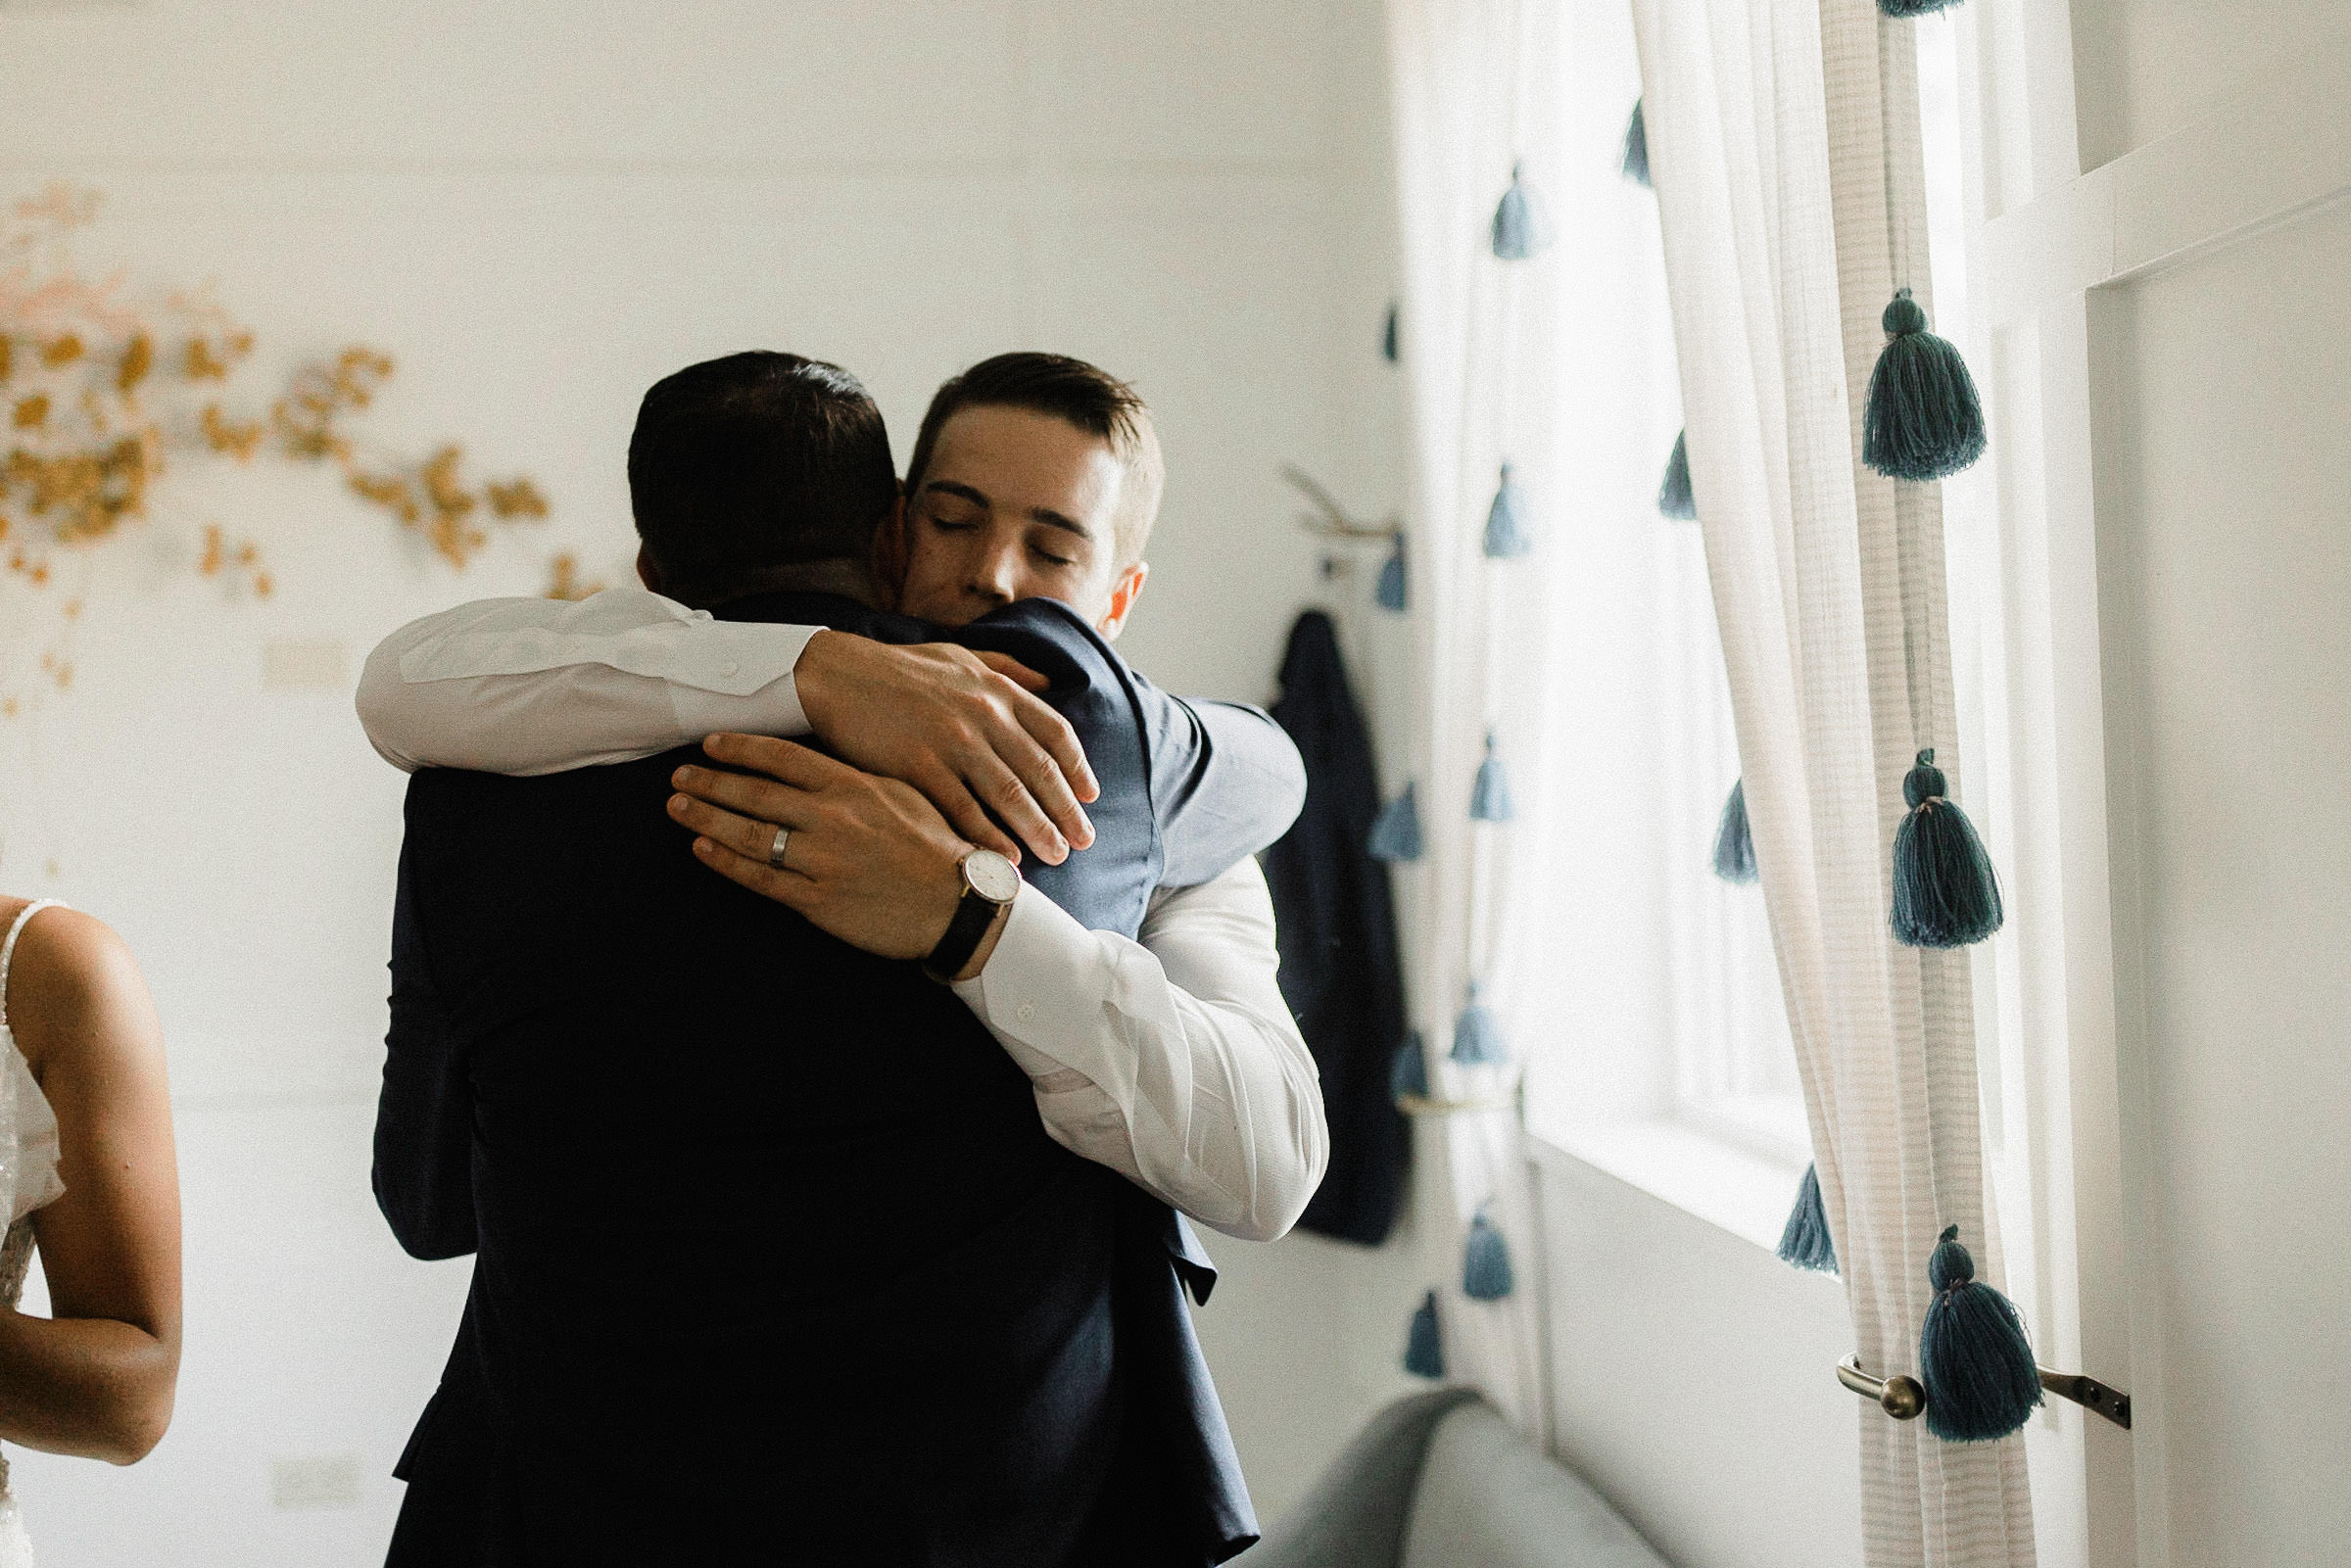 Groom and best man embrace in the bridal suite